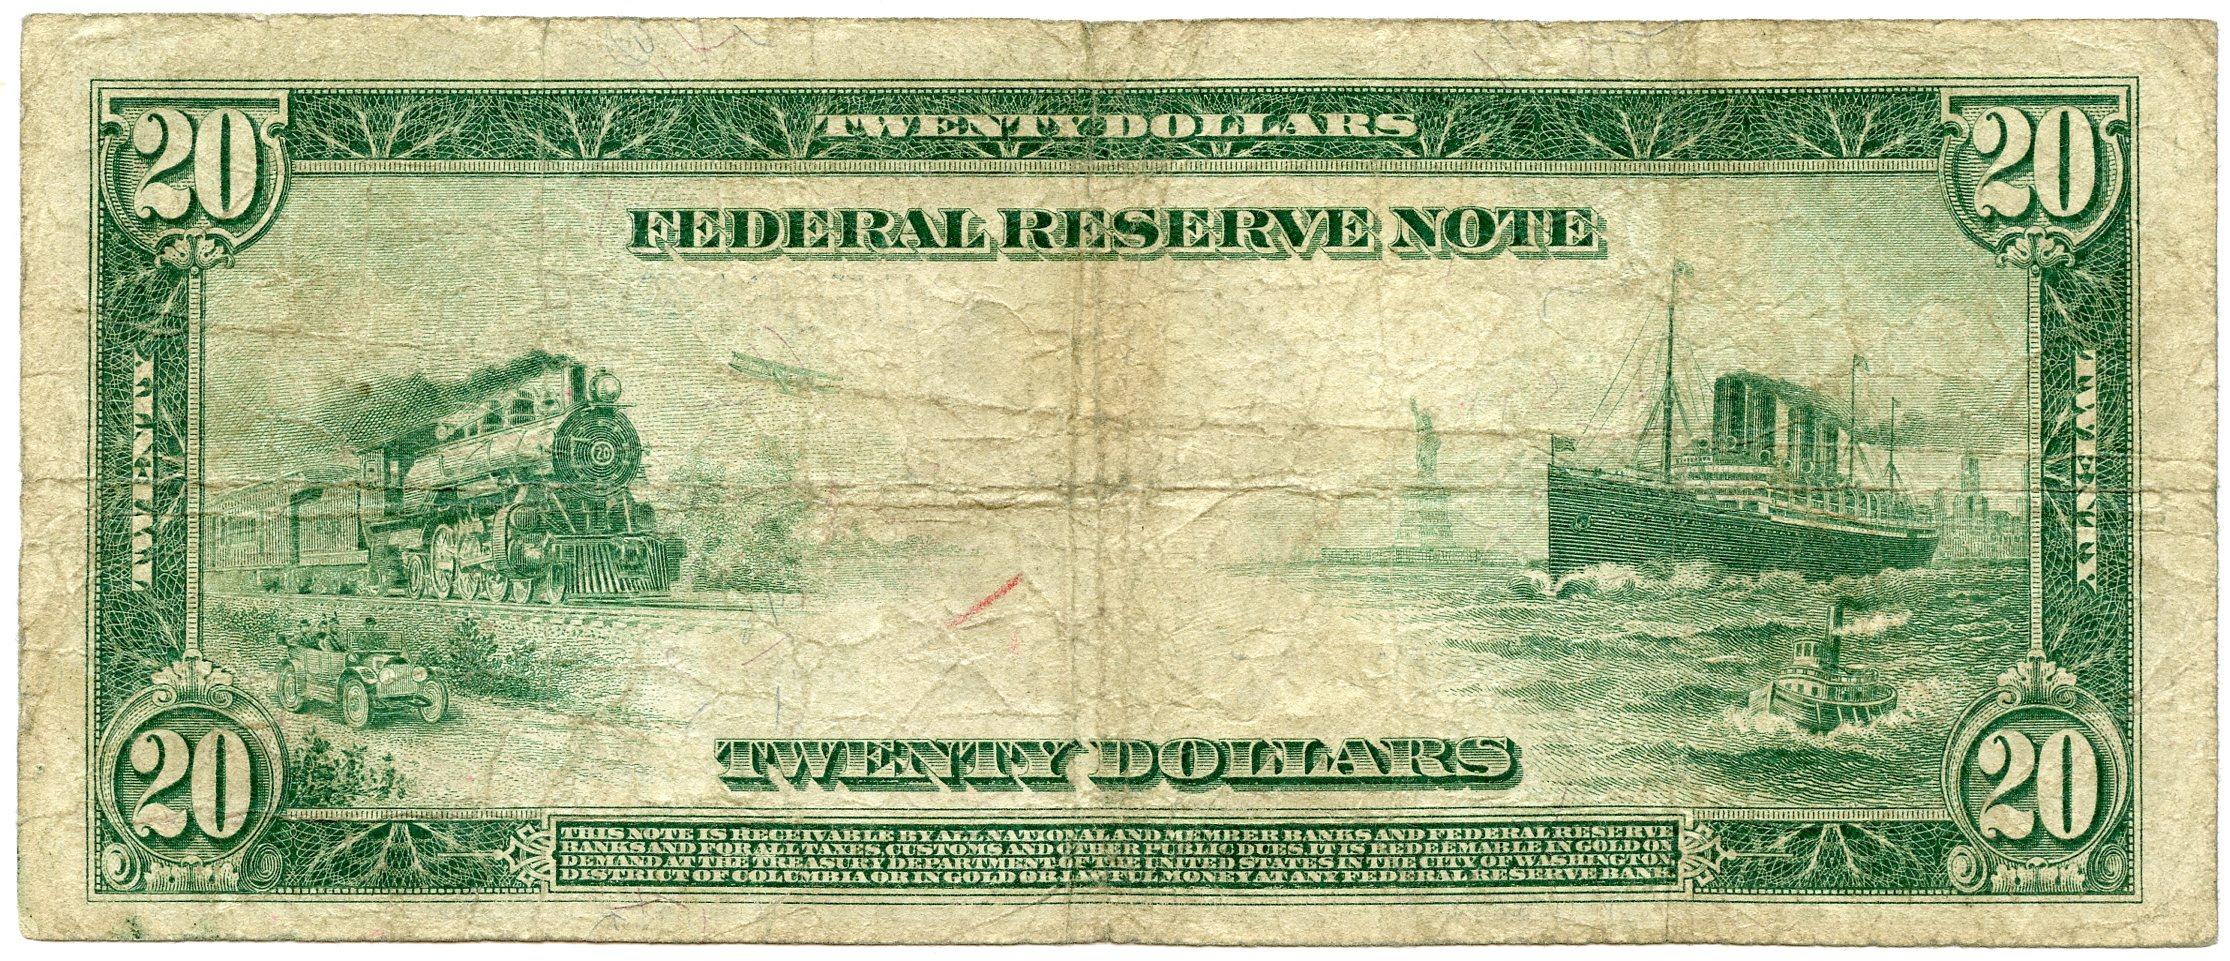 Twenty Dollar Bill Federal Reserve Note Blue Seal Large Size Series 1914 US Currency Good or Better